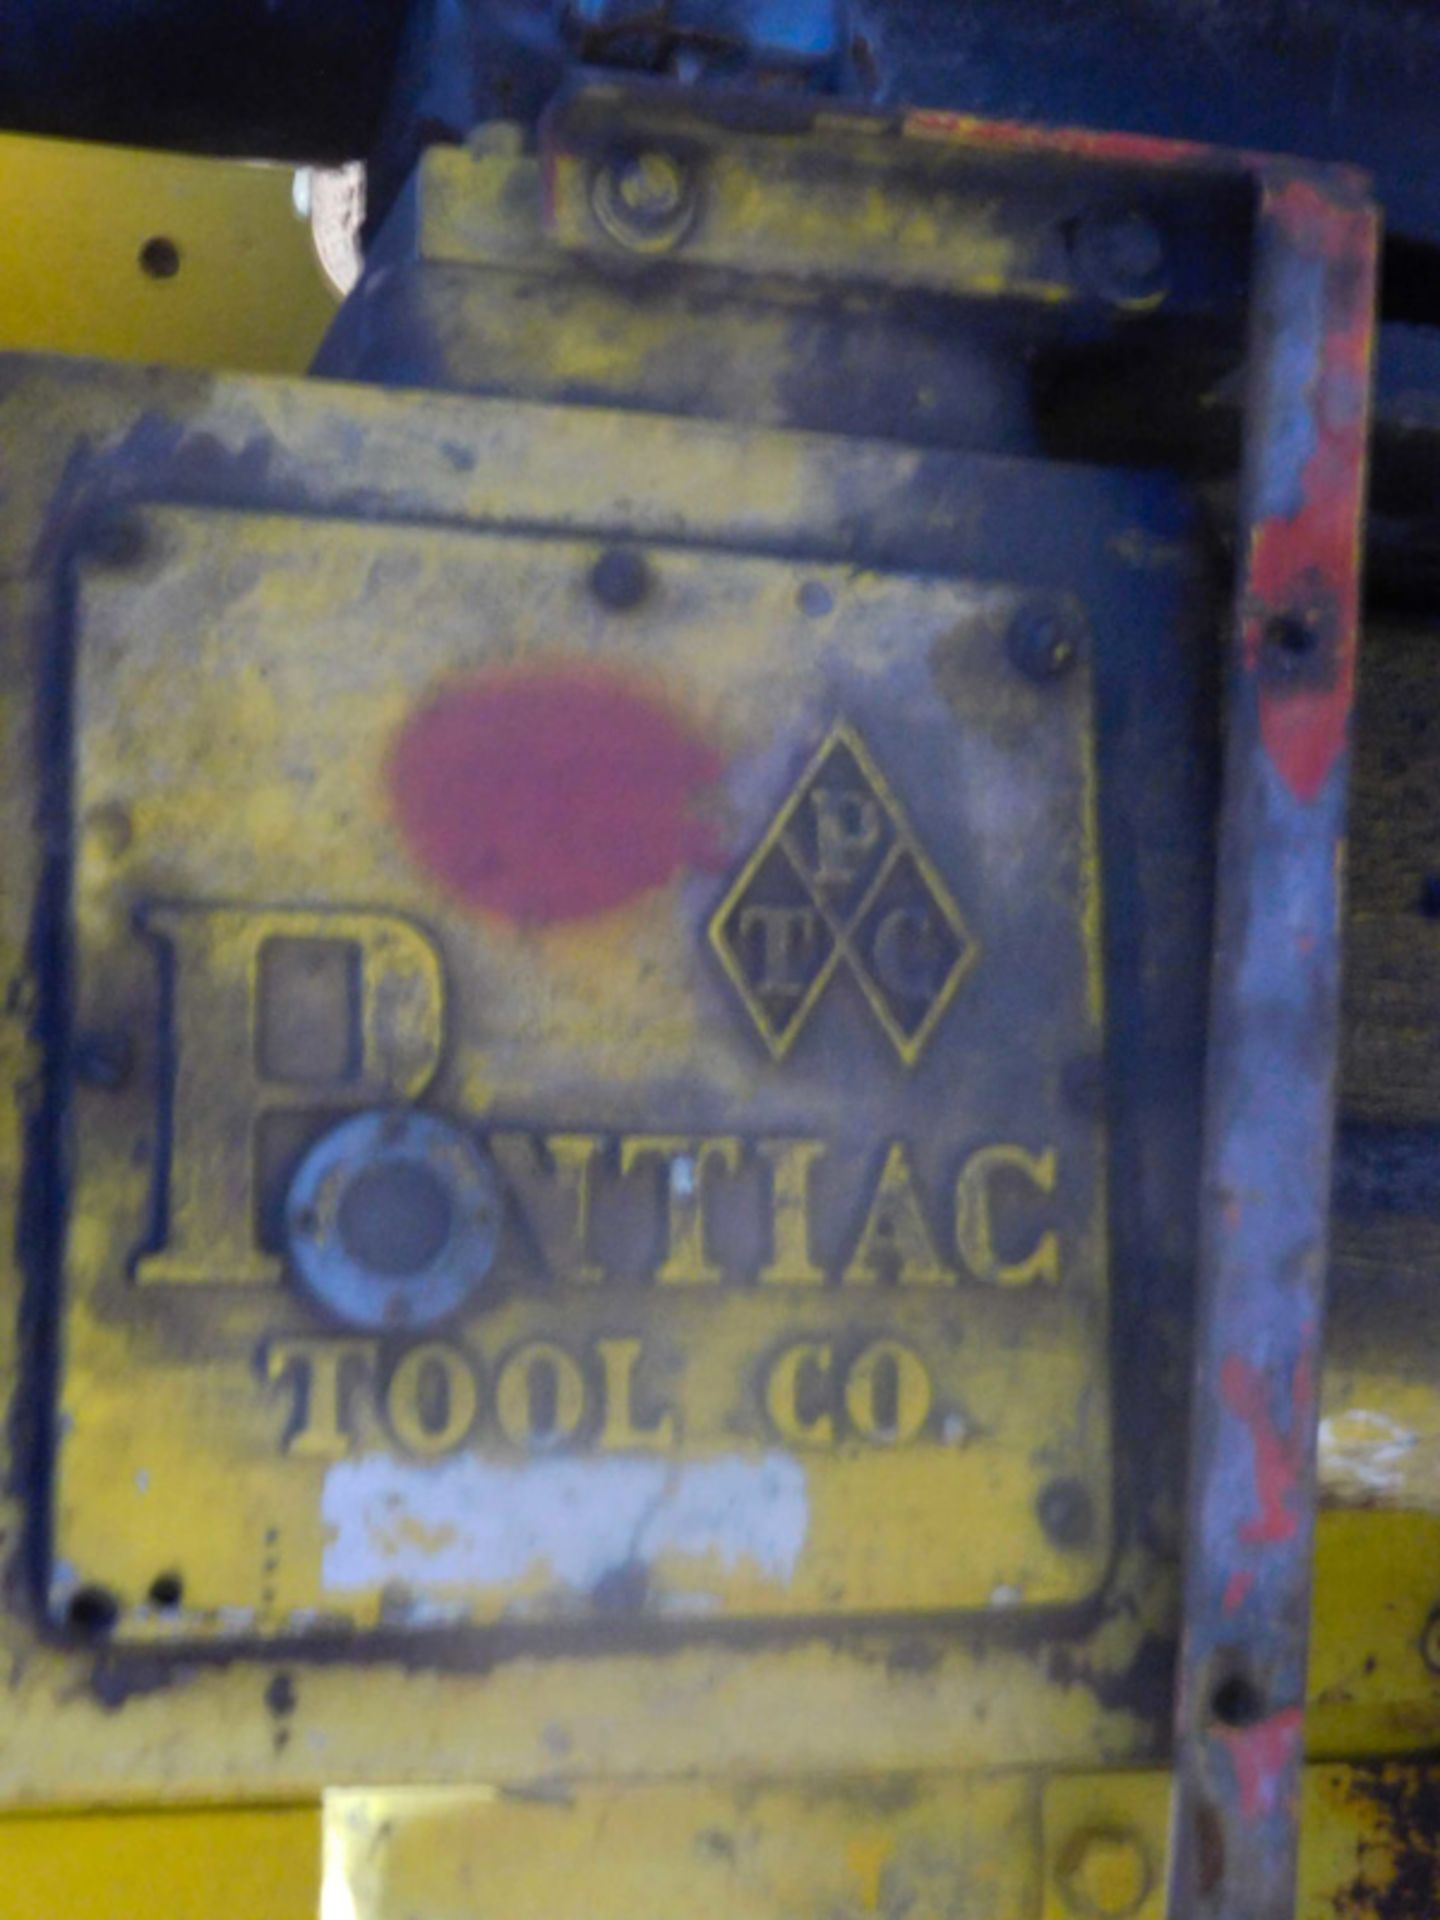 Pontiac Portable Boring Mill-Drill | 6" Spindle Diam., Mdl: N/A, S/N: N/A - 7244P - Image 4 of 9